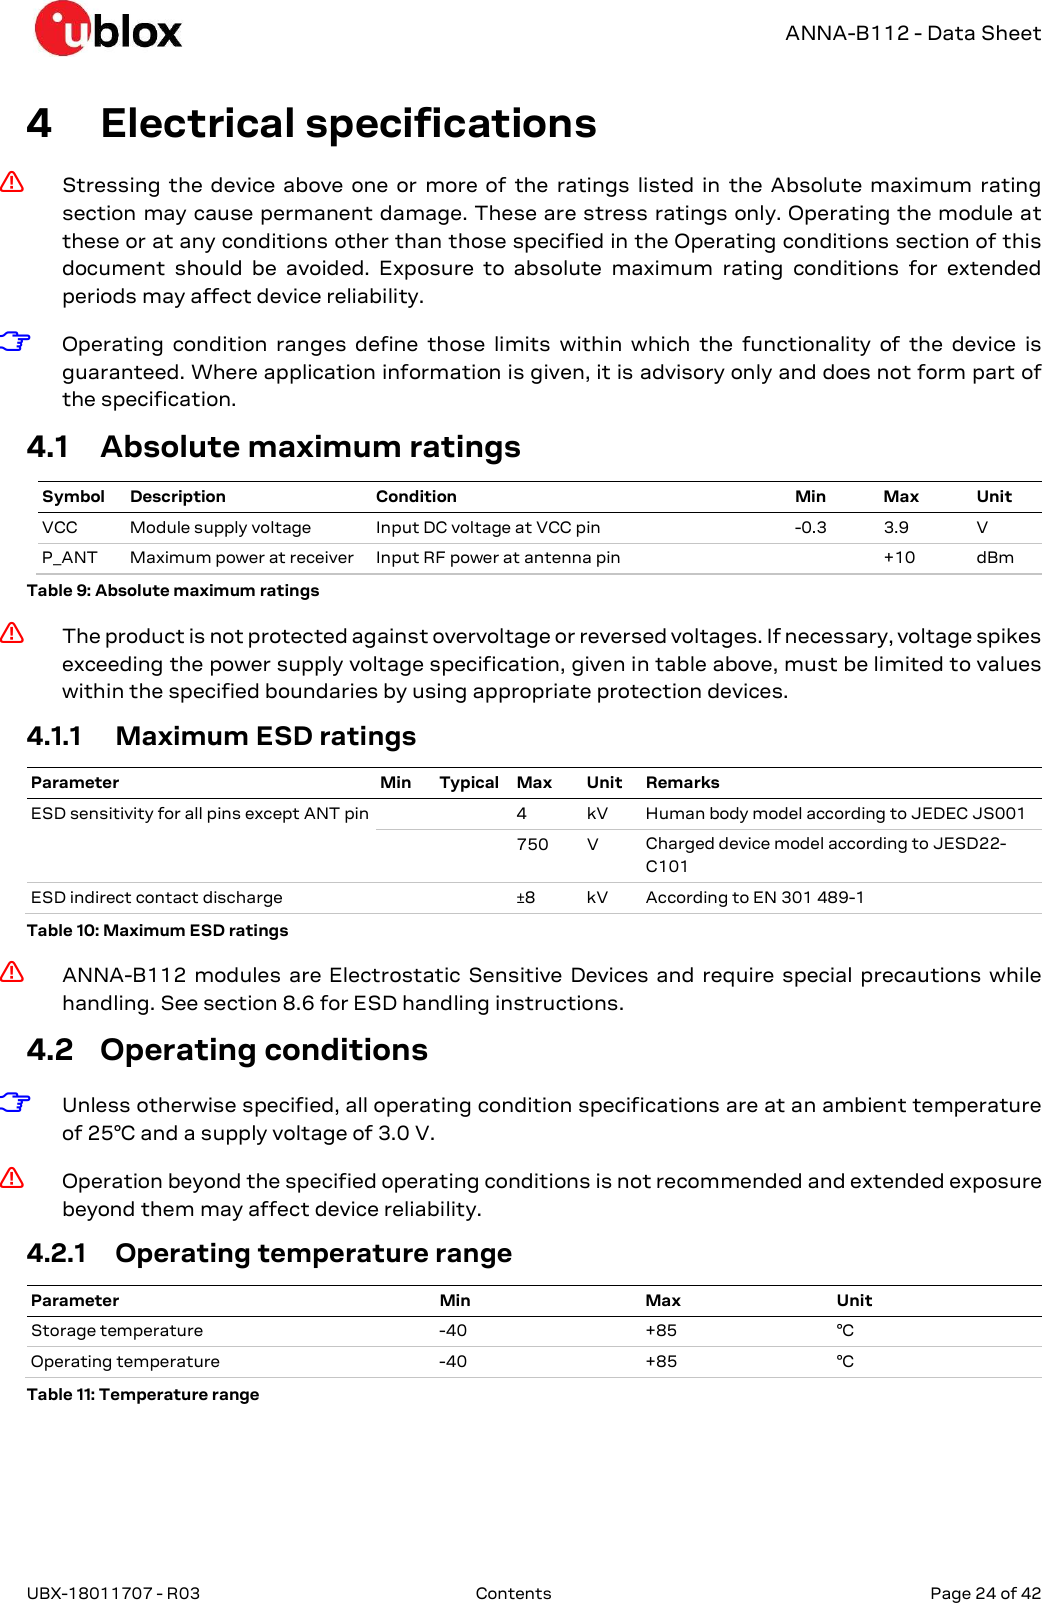   ANNA-B112 - Data Sheet UBX-18011707 - R03  Contents   Page 24 of 42      4 Electrical specifications ⚠ Stressing  the  device  above  one  or  more  of  the  ratings  listed  in  the  Absolute  maximum  rating section may cause permanent damage. These are stress ratings only. Operating the module at these or at any conditions other than those specified in the Operating conditions section of this document  should  be  avoided.  Exposure  to  absolute  maximum  rating  conditions  for  extended periods may affect device reliability. ☞ Operating  condition  ranges  define  those  limits  within  which  the  functionality  of  the  device  is guaranteed. Where application information is given, it is advisory only and does not form part of the specification. 4.1 Absolute maximum ratings Symbol Description Condition Min Max Unit VCC  Module supply voltage  Input DC voltage at VCC pin  -0.3  3.9  V P_ANT  Maximum power at receiver  Input RF power at antenna pin    +10  dBm Table 9: Absolute maximum ratings ⚠ The product is not protected against overvoltage or reversed voltages. If necessary, voltage spikes exceeding the power supply voltage specification, given in table above, must be limited to values within the specified boundaries by using appropriate protection devices. 4.1.1 Maximum ESD ratings Parameter Min Typical Max Unit Remarks ESD sensitivity for all pins except ANT pin     4  kV  Human body model according to JEDEC JS001     750  V  Charged device model according to JESD22-C101 ESD indirect contact discharge      ±8  kV  According to EN 301 489-1 Table 10: Maximum ESD ratings ⚠ ANNA-B112  modules  are  Electrostatic  Sensitive  Devices  and  require  special  precautions  while handling. See section 8.6 for ESD handling instructions. 4.2 Operating conditions ☞ Unless otherwise specified, all operating condition specifications are at an ambient temperature of 25°C and a supply voltage of 3.0 V. ⚠ Operation beyond the specified operating conditions is not recommended and extended exposure beyond them may affect device reliability. 4.2.1 Operating temperature range Parameter Min Max Unit Storage temperature  -40  +85  °C Operating temperature  -40  +85  °C Table 11: Temperature range 